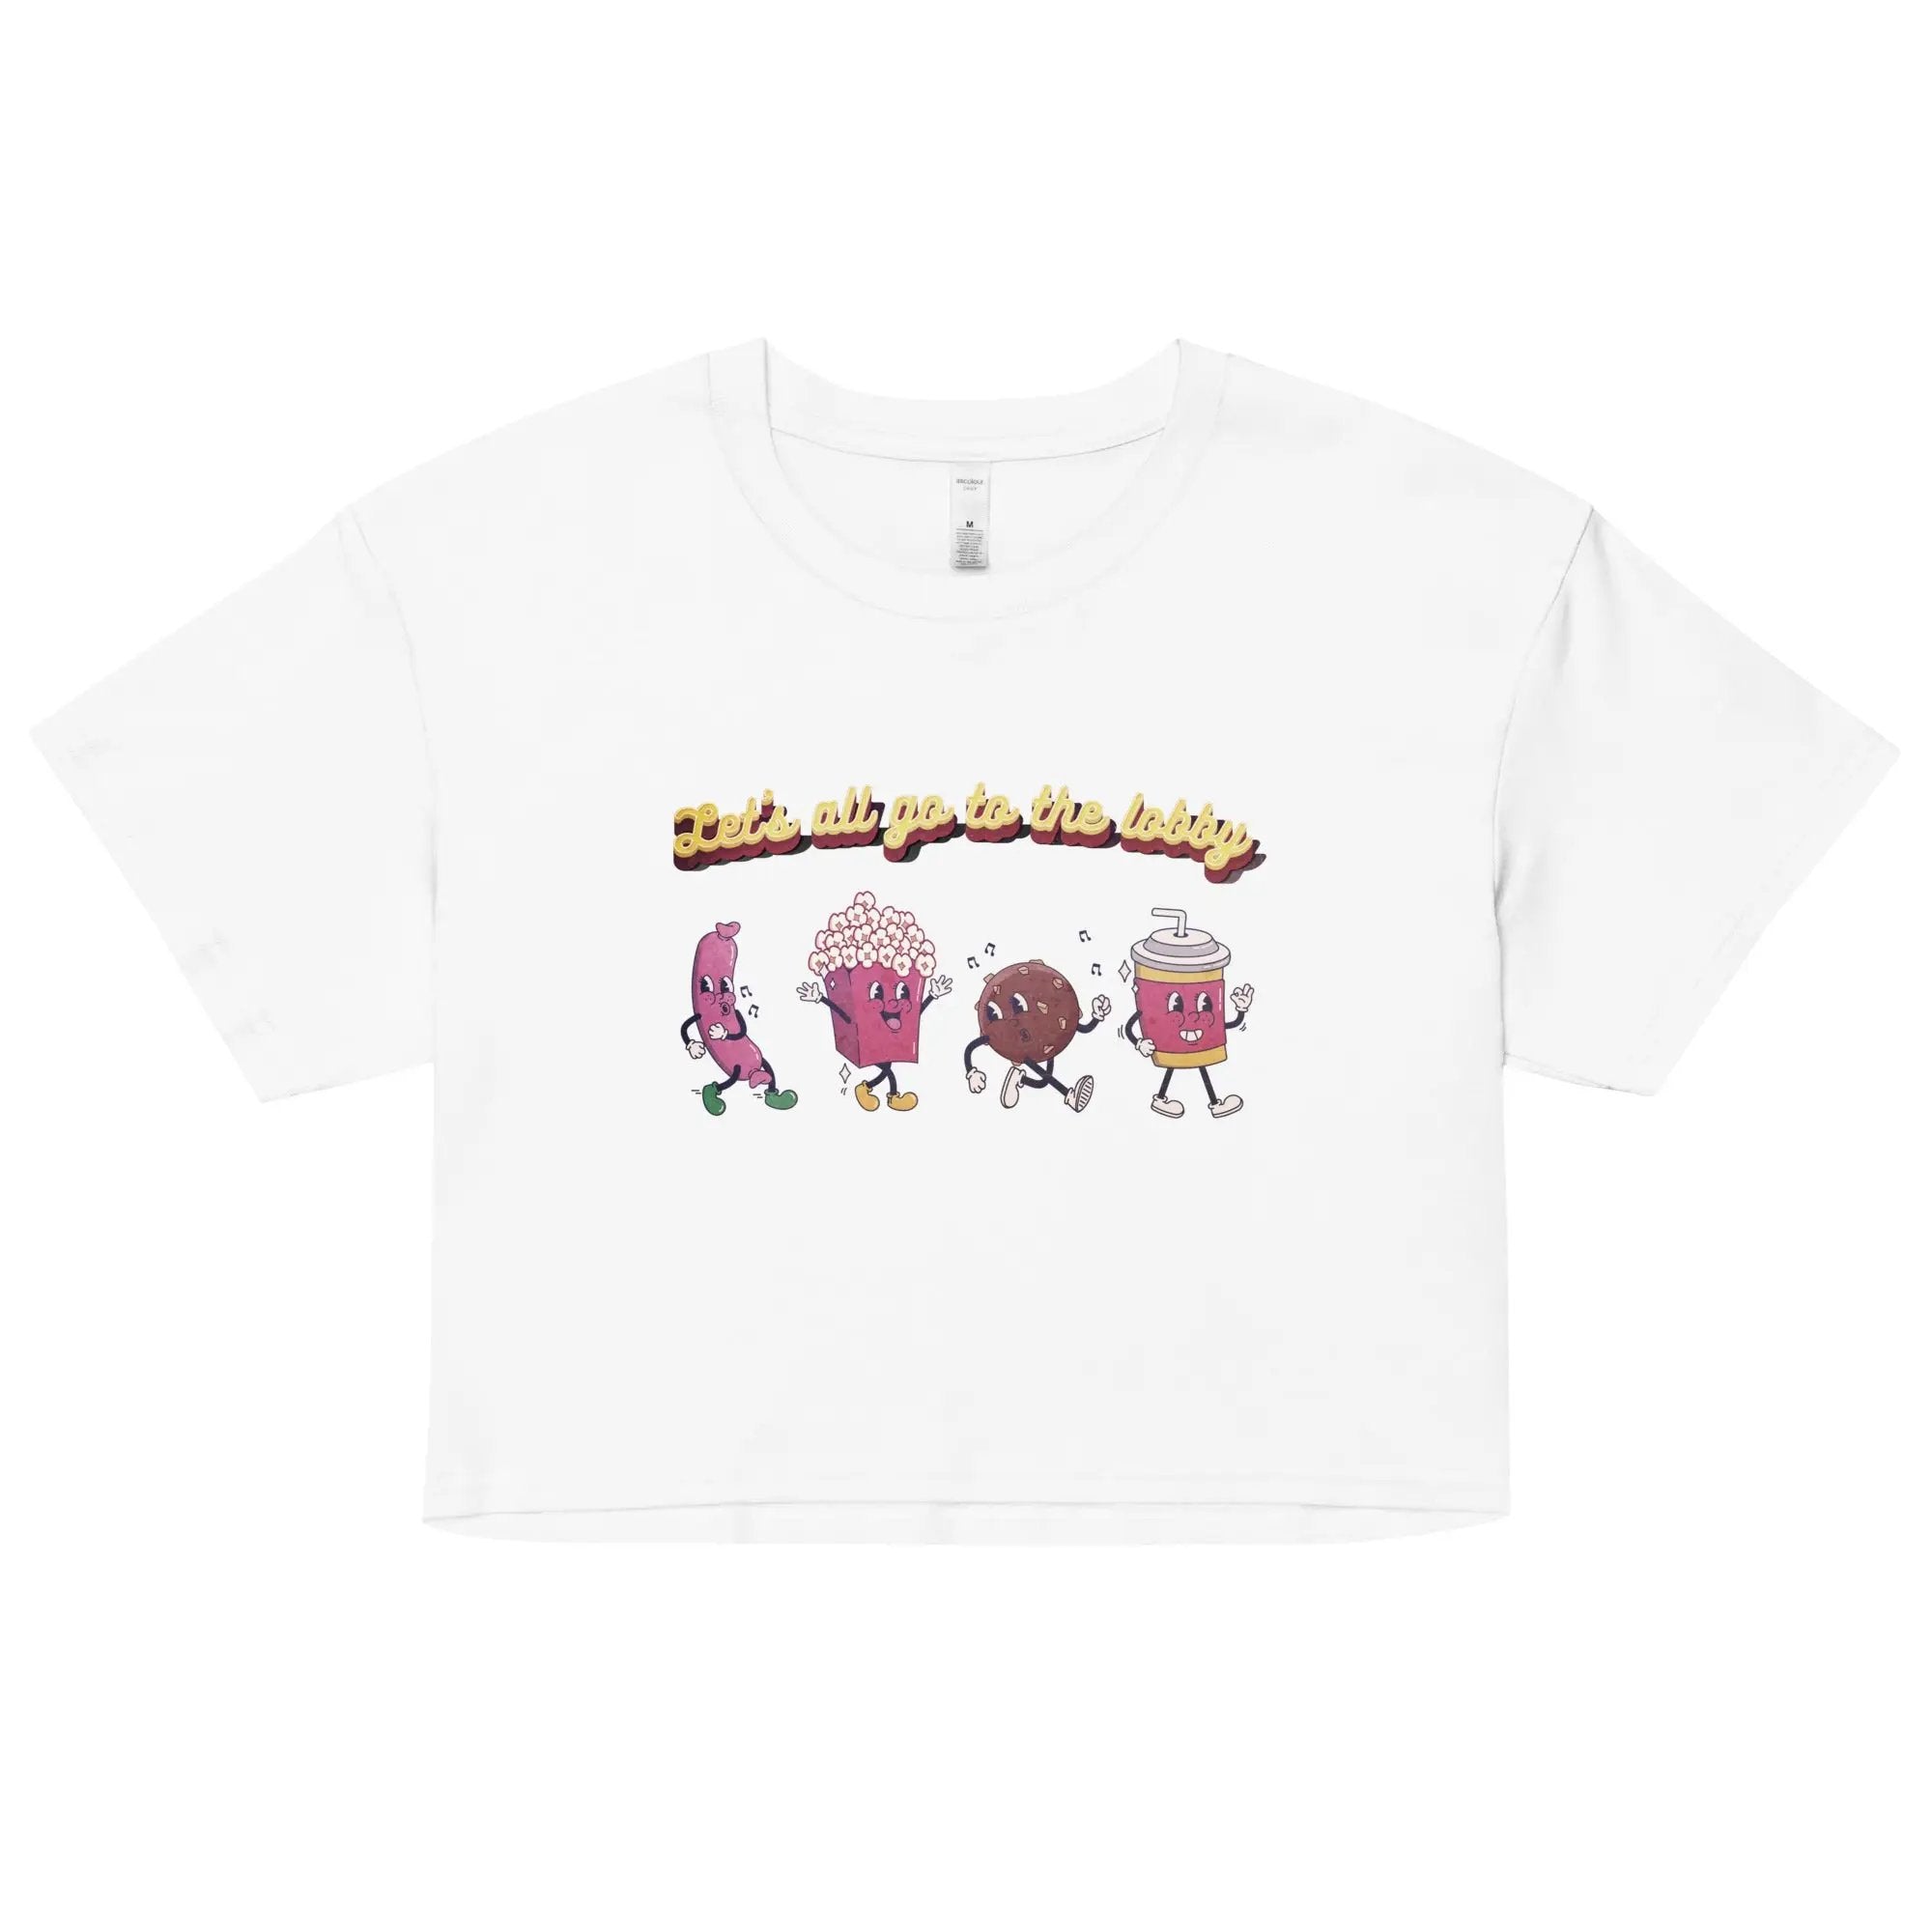 a pink t - shirt with cartoon characters on it